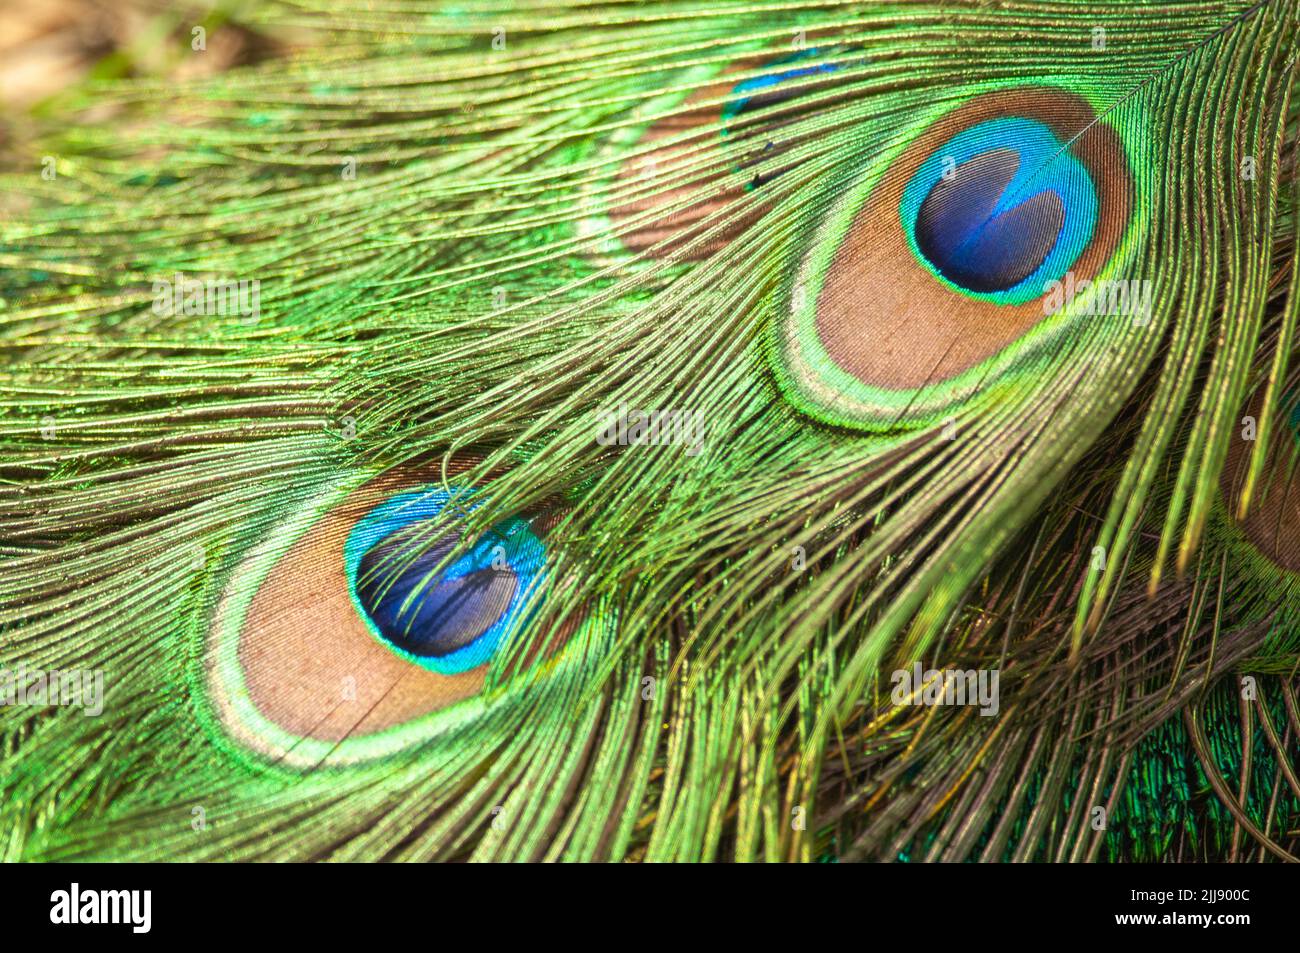 Peacock feather close up Stock Photo